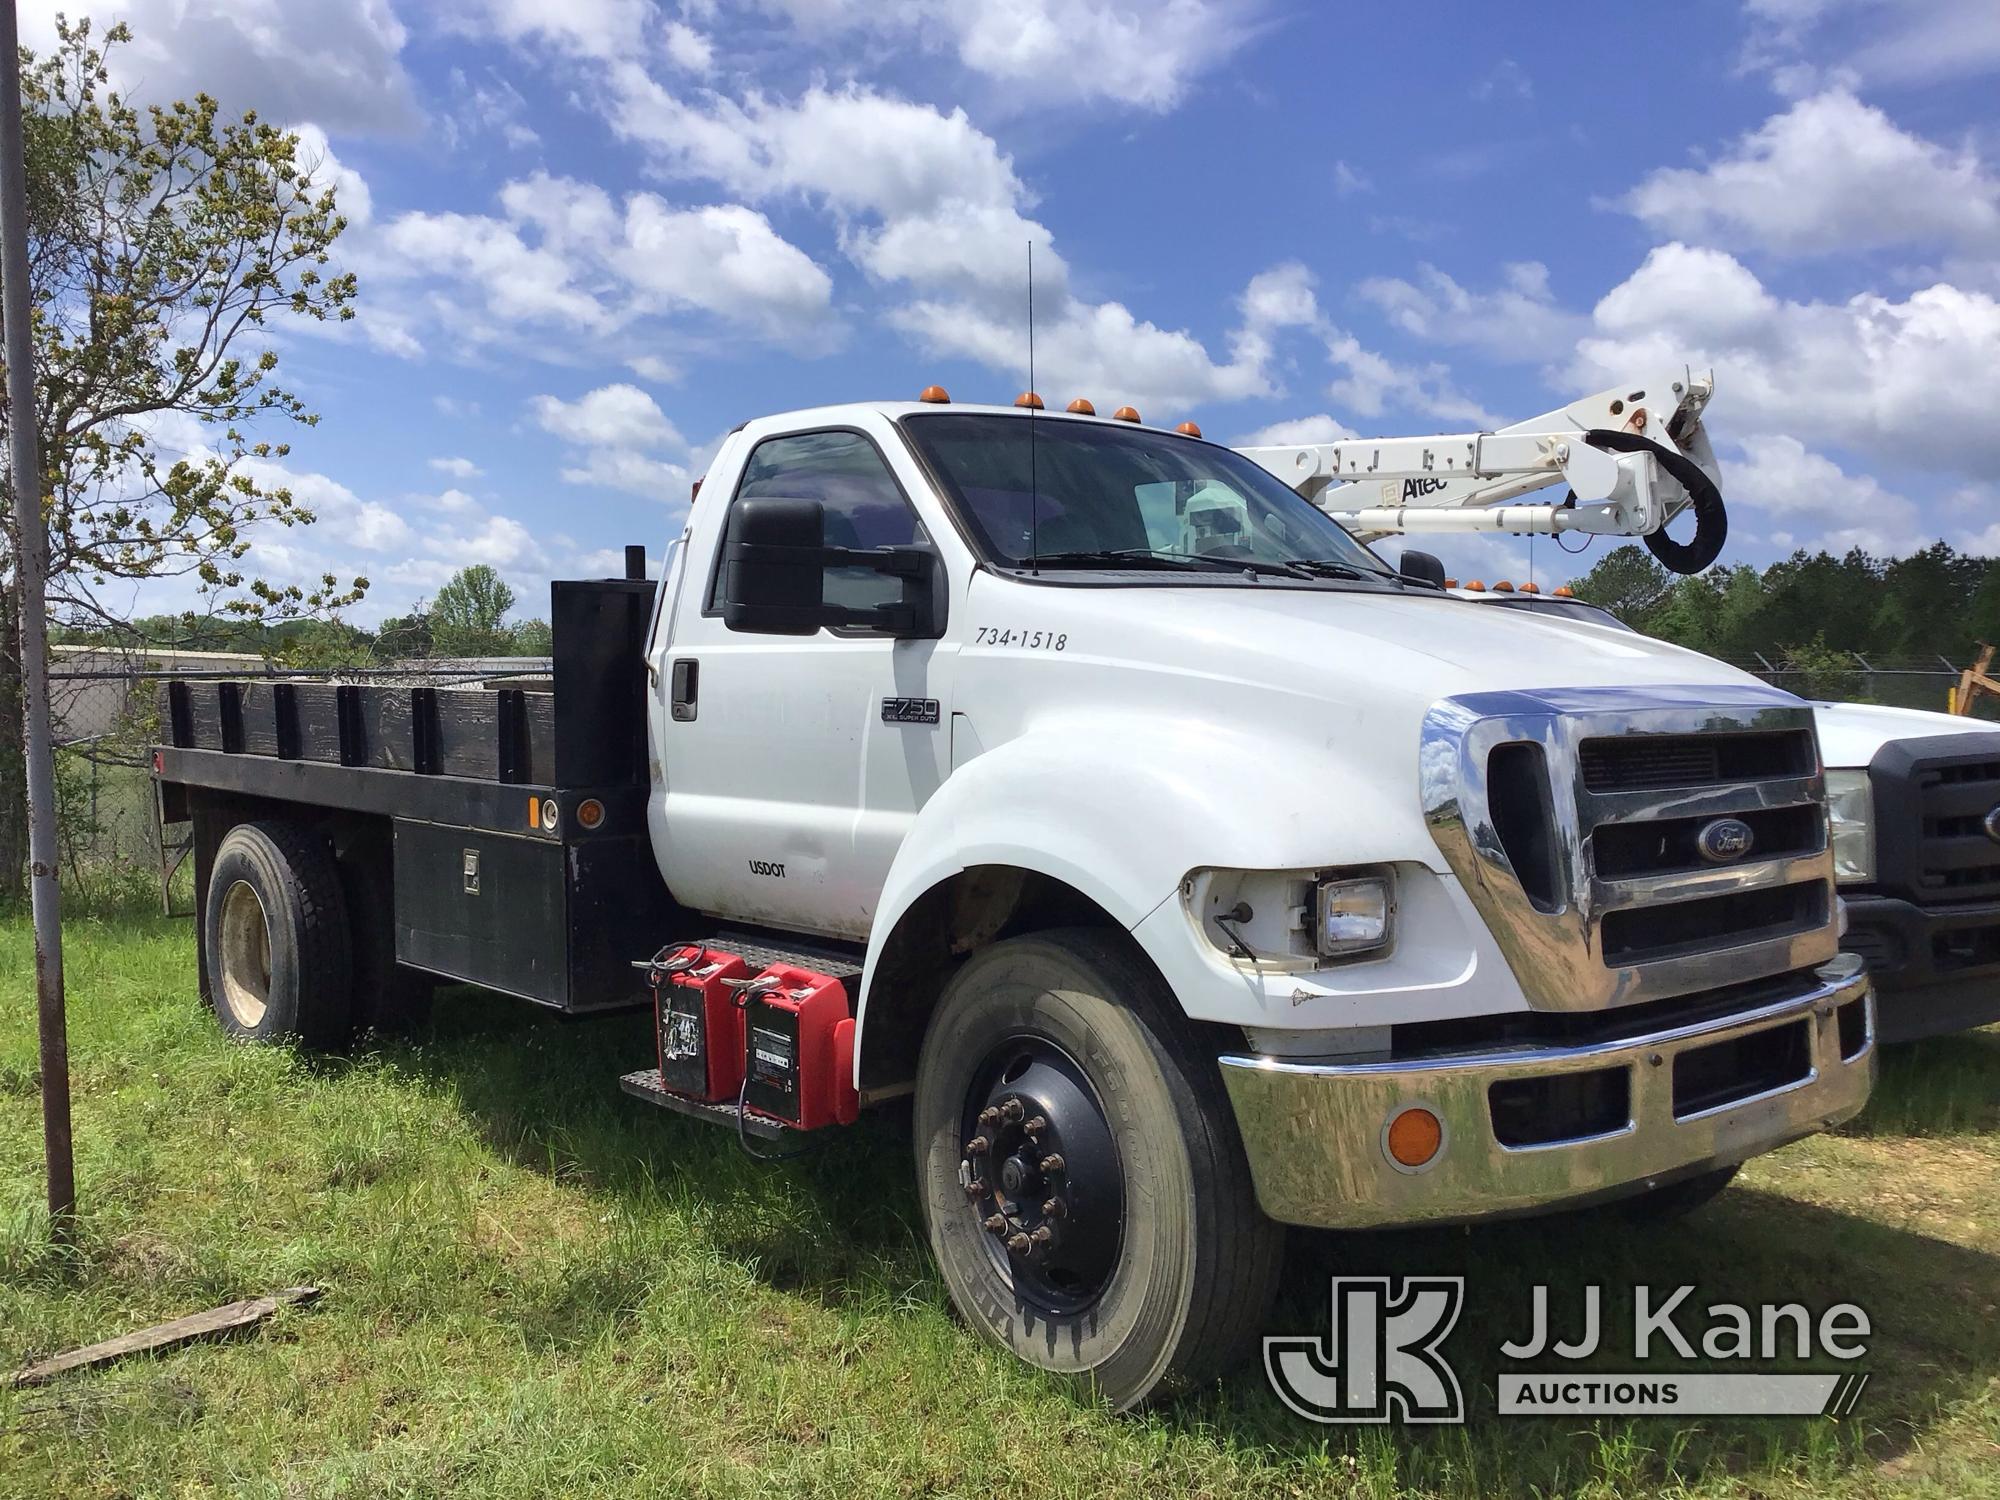 (Byram, MS) 2011 Ford F750 Flatbed Truck Jump to Start, Runs, Will Not Move, Transmission Gears Only